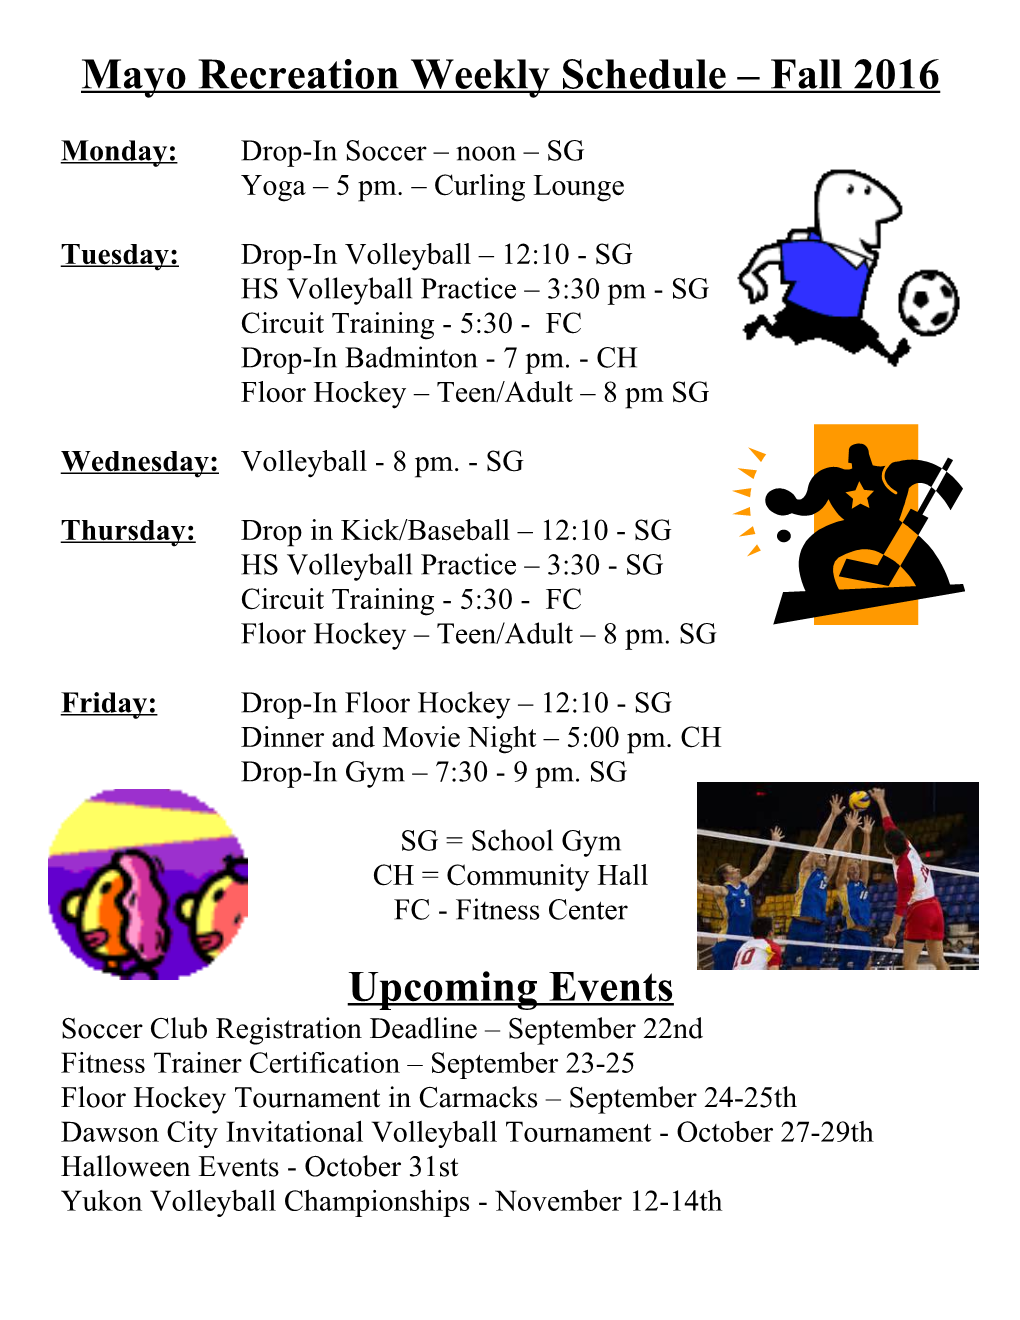 Temporary Fall Recreation Schedule